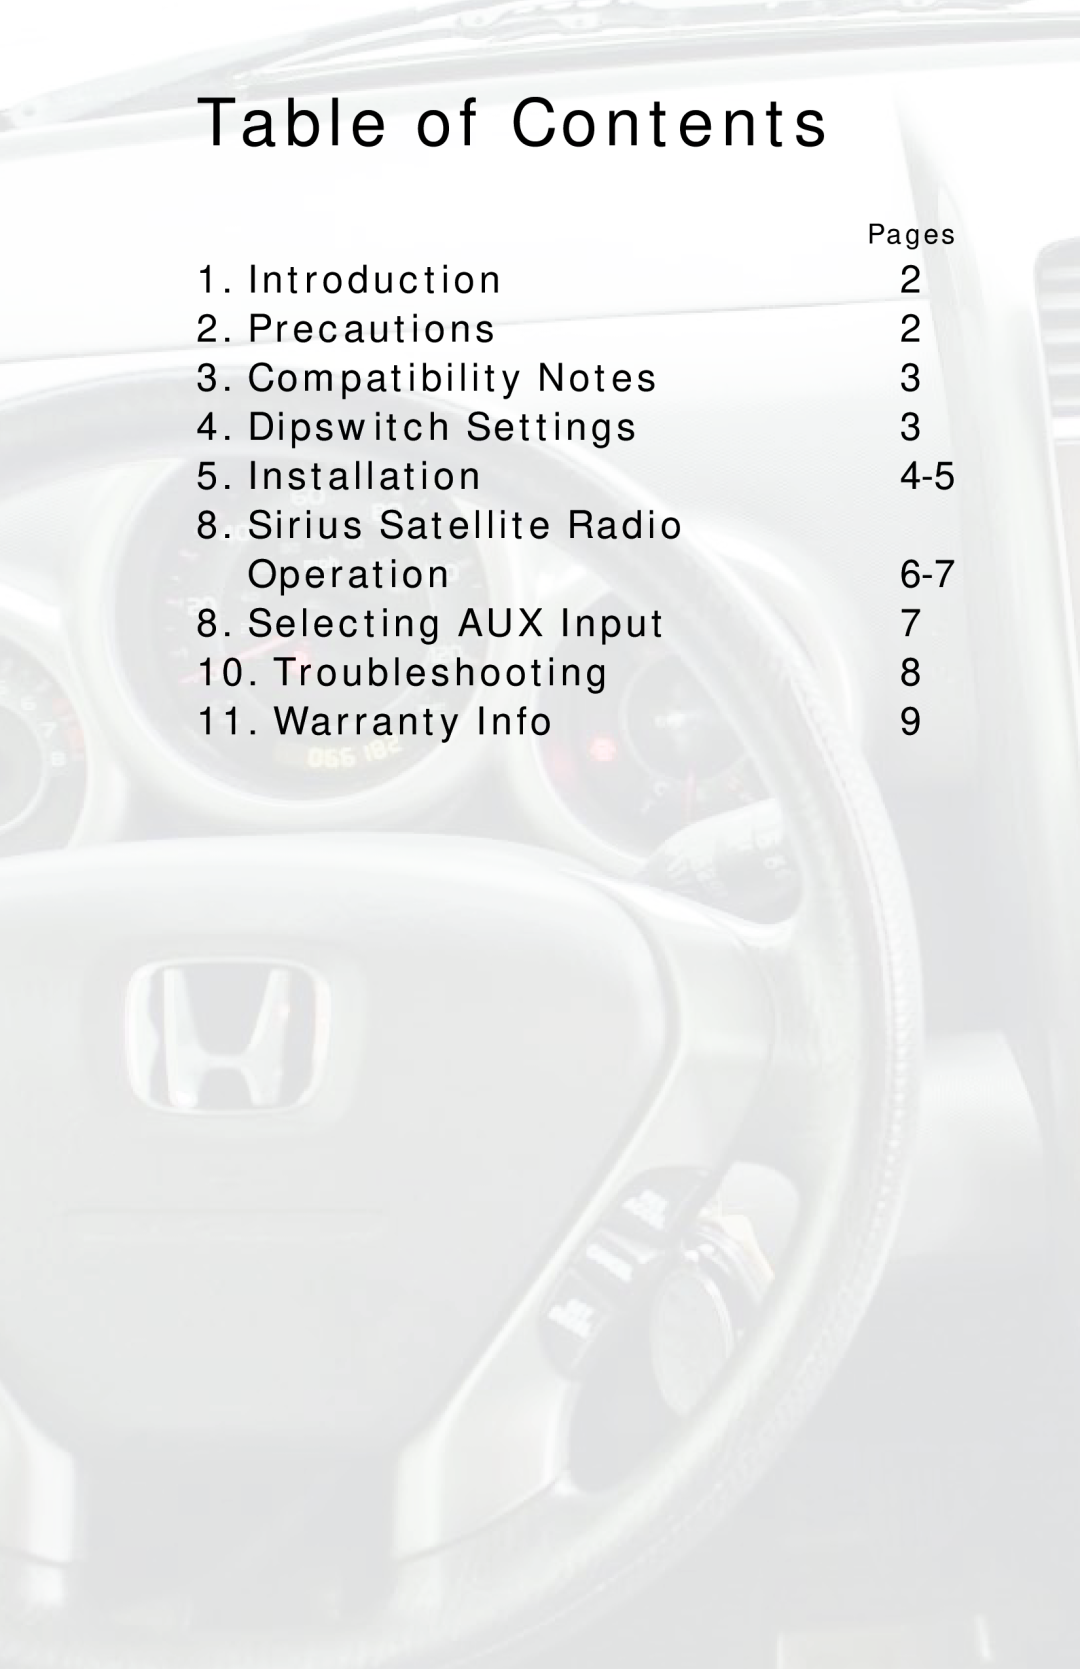 iSimple PGHHD1, ISHD11 owner manual Table of Contents 